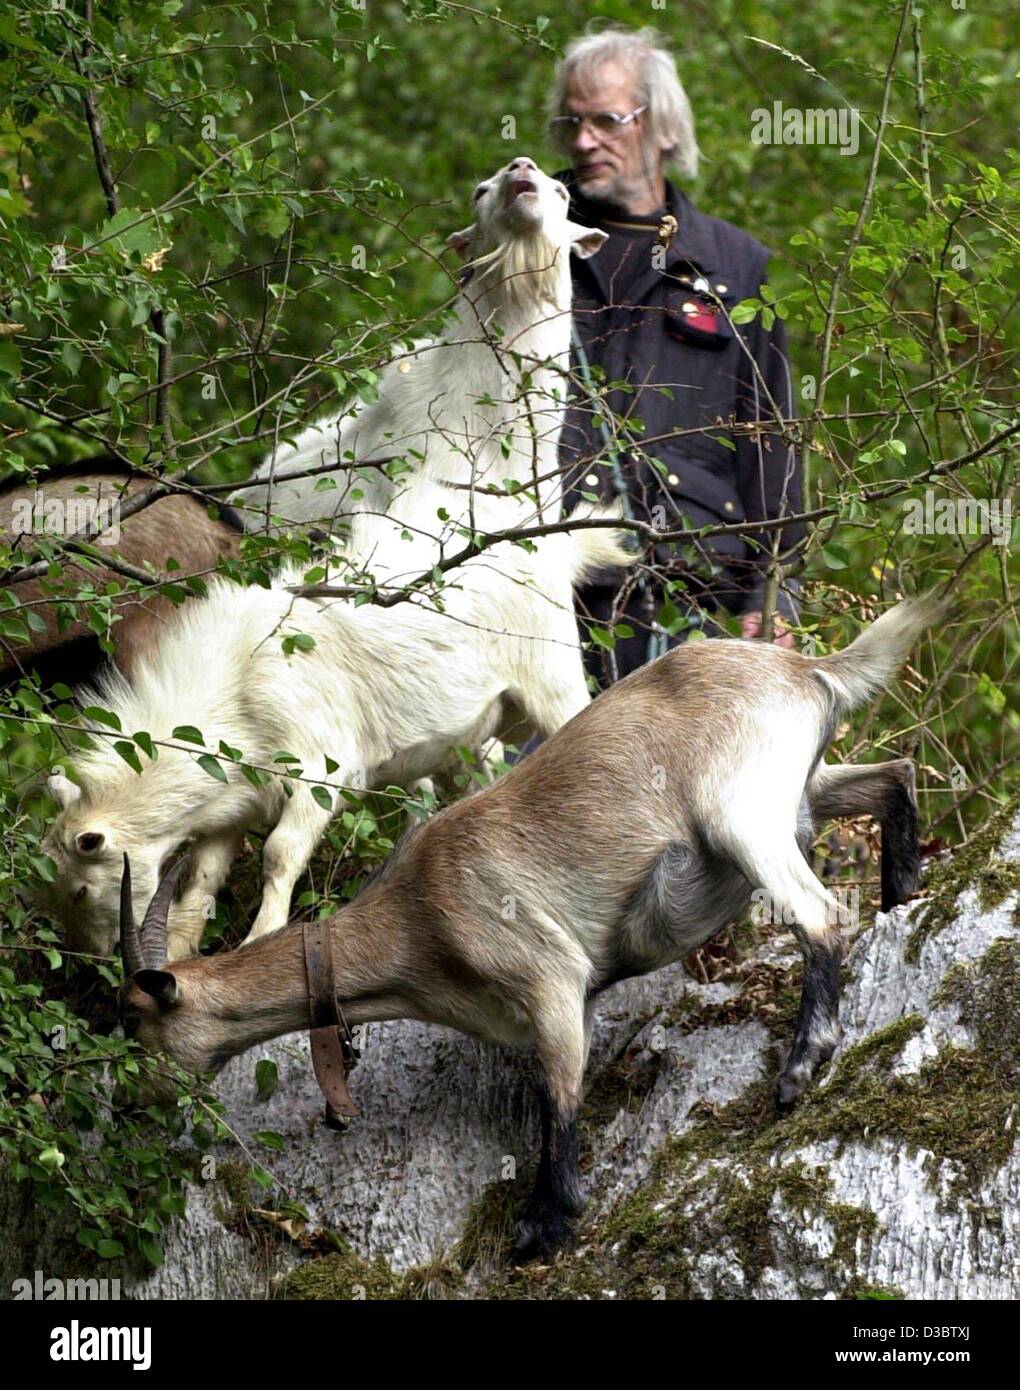 (dpa) - Charly billy goat (bottom) climbs with his relatives and Eckhard Schoene (R), Project leader of the nature conservancy association 'BUND' across the cliffs on the Kalkberg in Lueneburg, Germany, 31 August 2003. The Kalkberg is one of the oldest nature reserves in Germany in the heart of the  Stock Photo